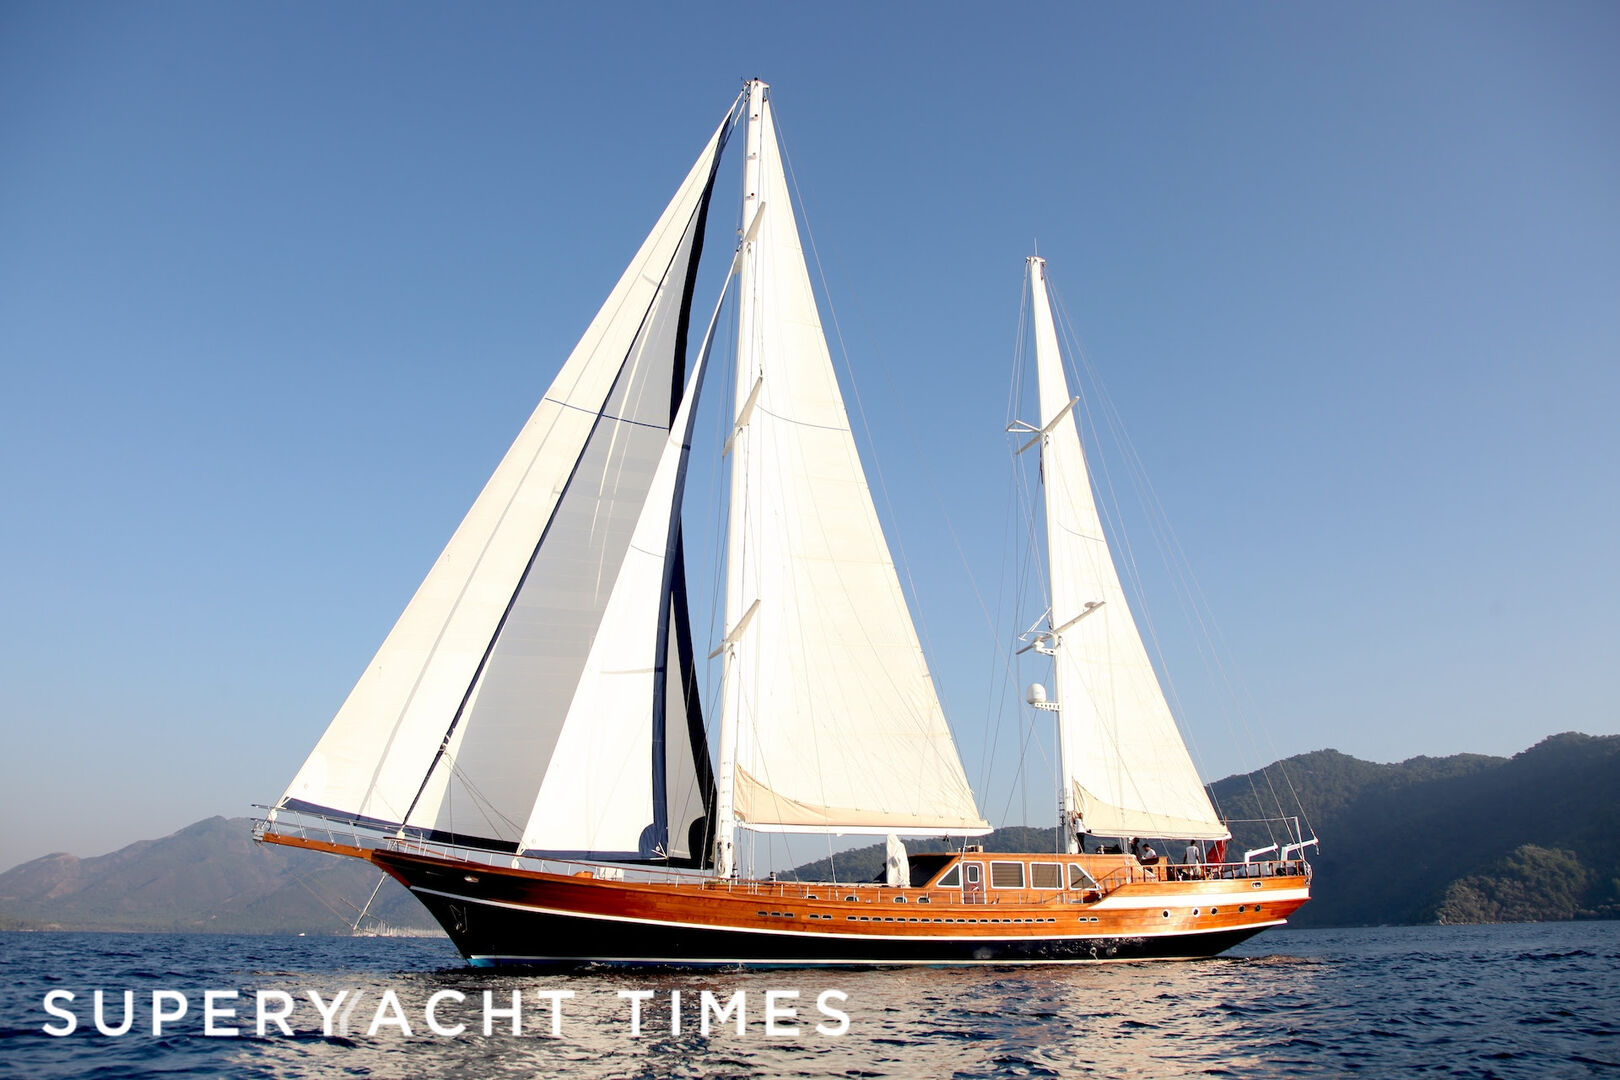 Queen of Datca yacht sailing 